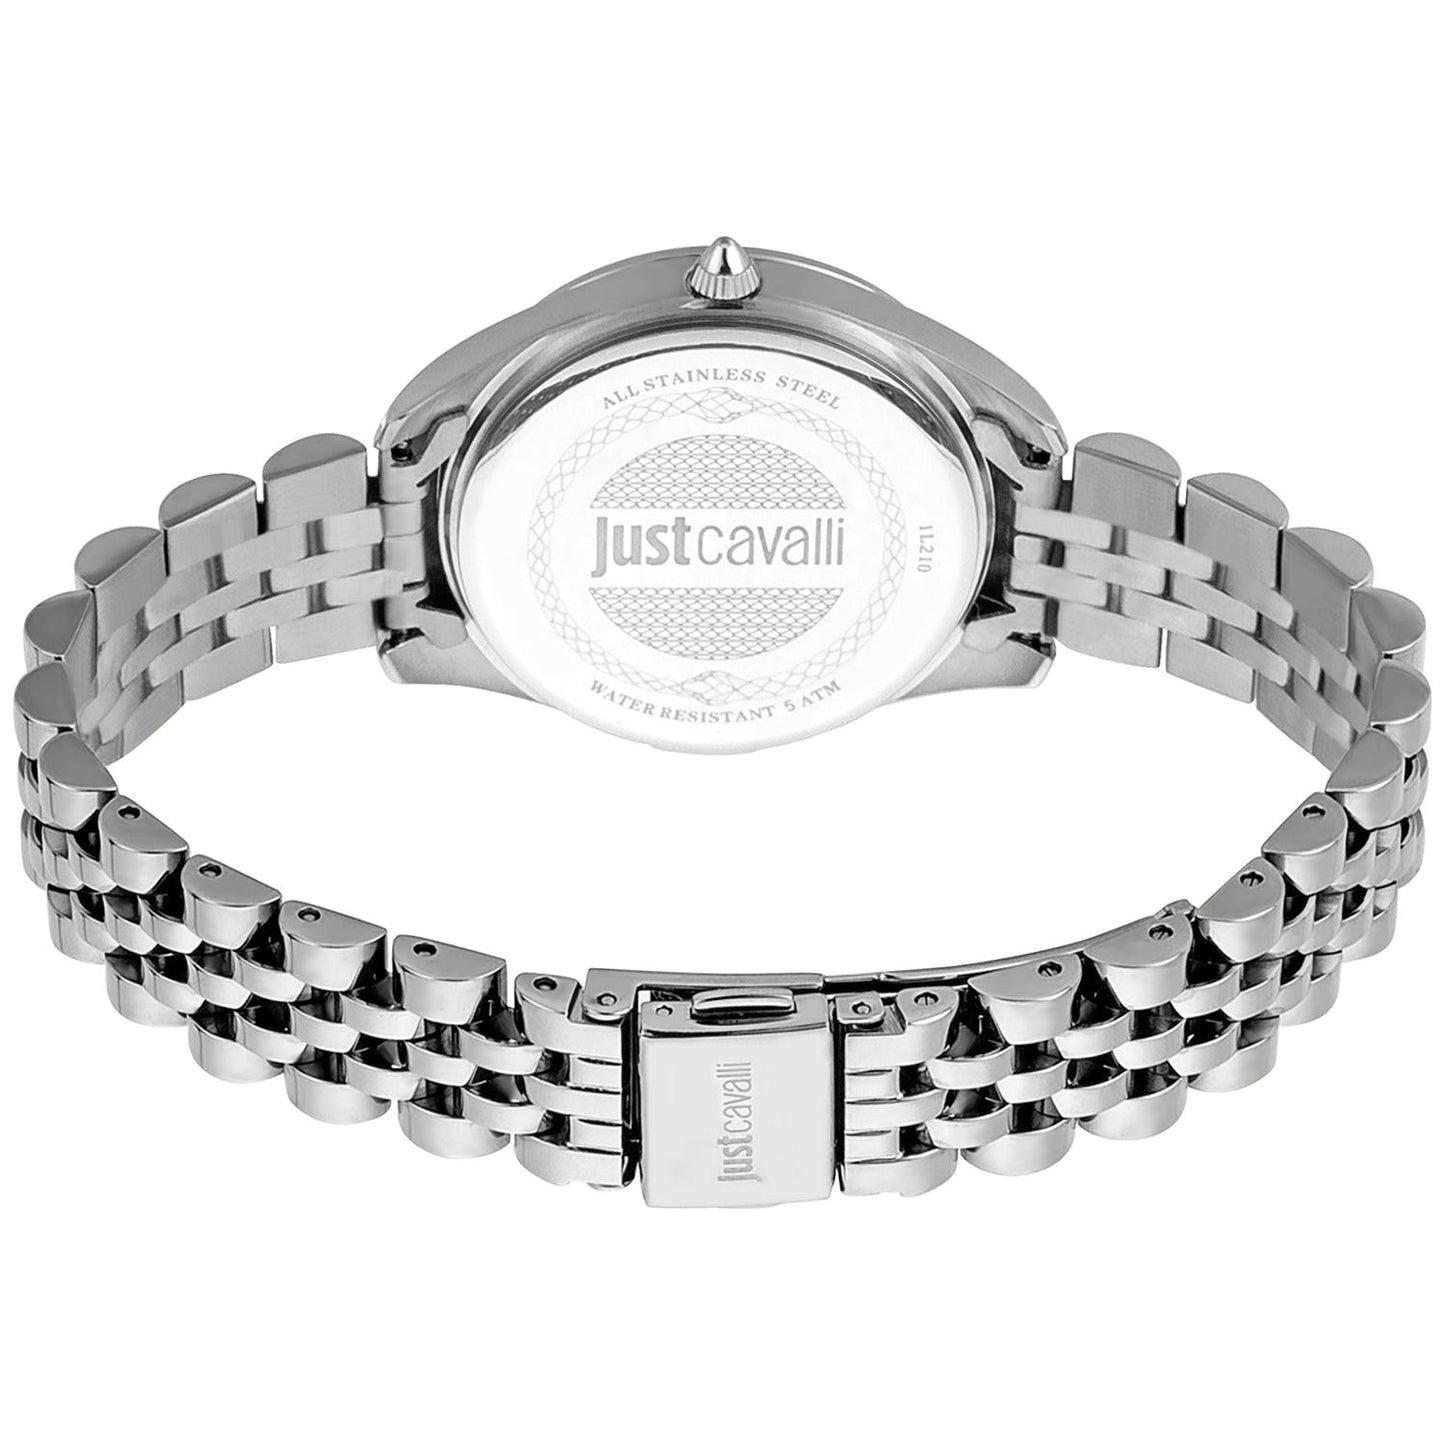 JUST CAVALLI TIME JUST CAVALLI TIME WATCHES Mod. JC1L210M0245 WATCHES just-cavalli-time-watches-mod-jc1l210m0245